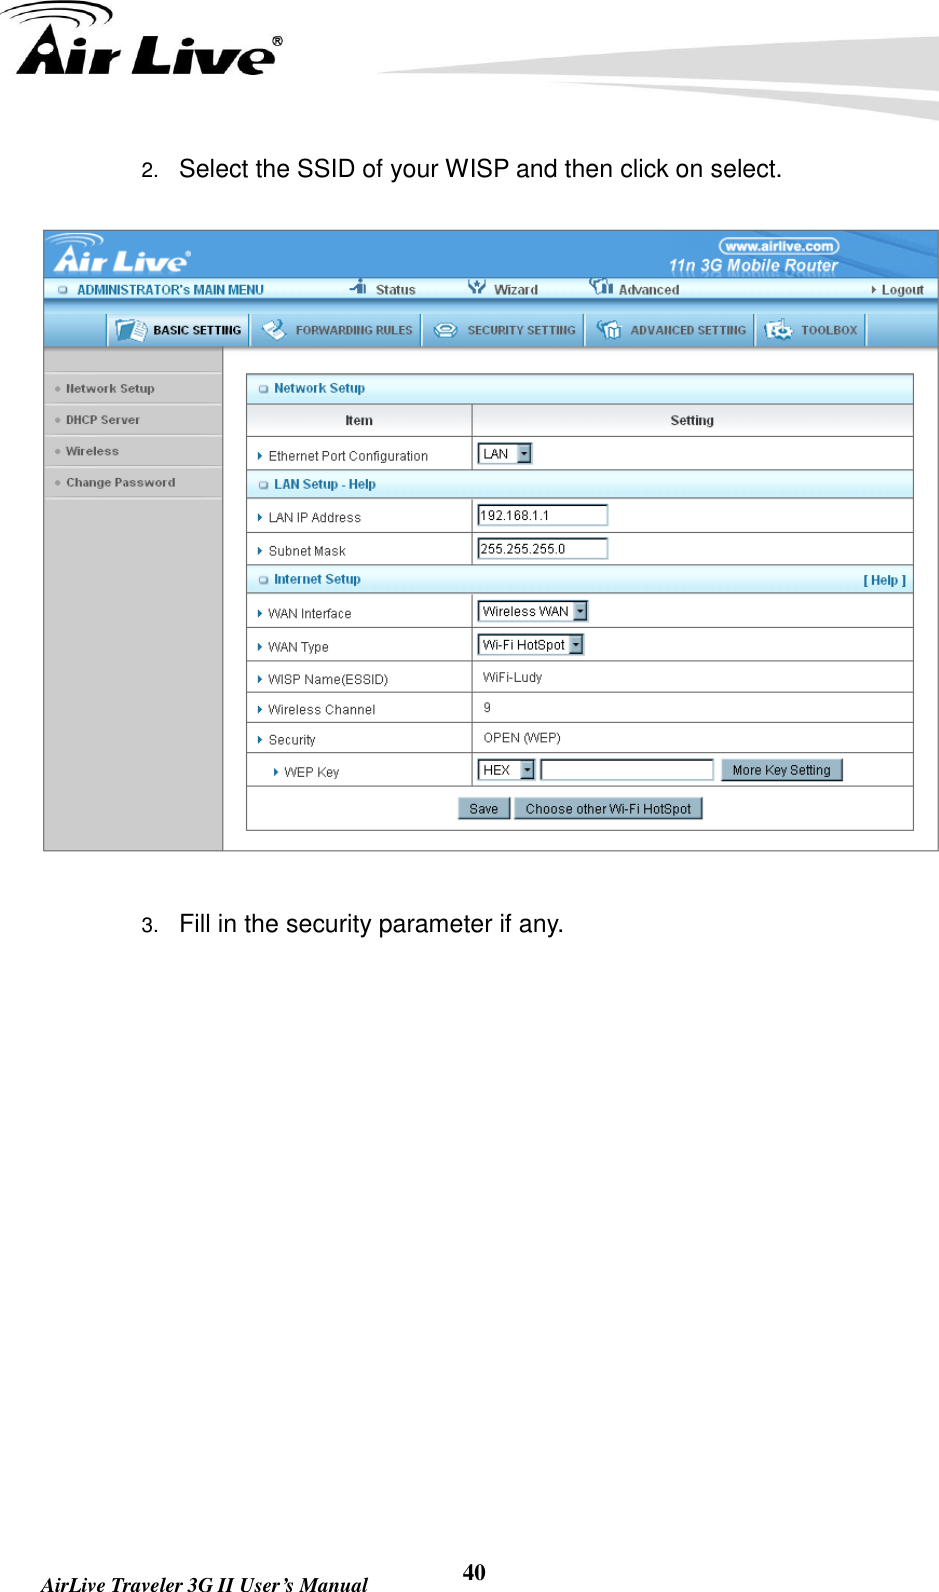   AirLive Traveler 3G II User’s Manual 40 2. Select the SSID of your WISP and then click on select.  3. Fill in the security parameter if any. 